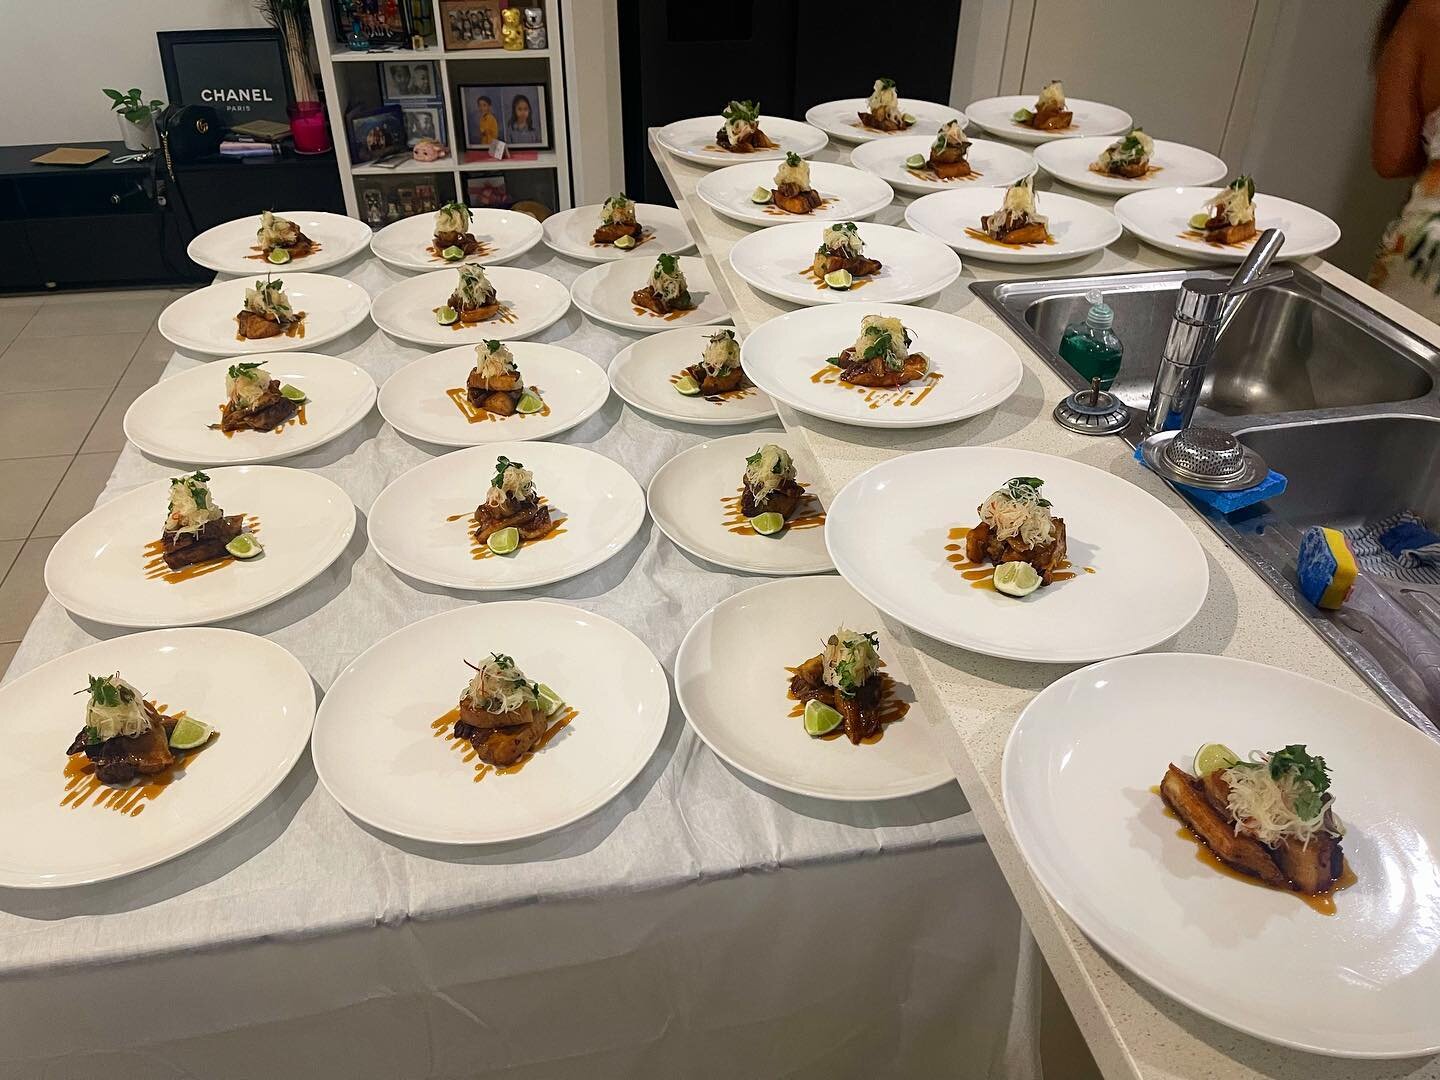 The plate up was so much fun! Happy to do it all again! #27plates #mapasion #foodartlove #chefstalk #foodporn #privatechef #melbournefoodie #melbournefinedining #privateparty #foodstagram #chefsofinstagram #chefstable #plateup